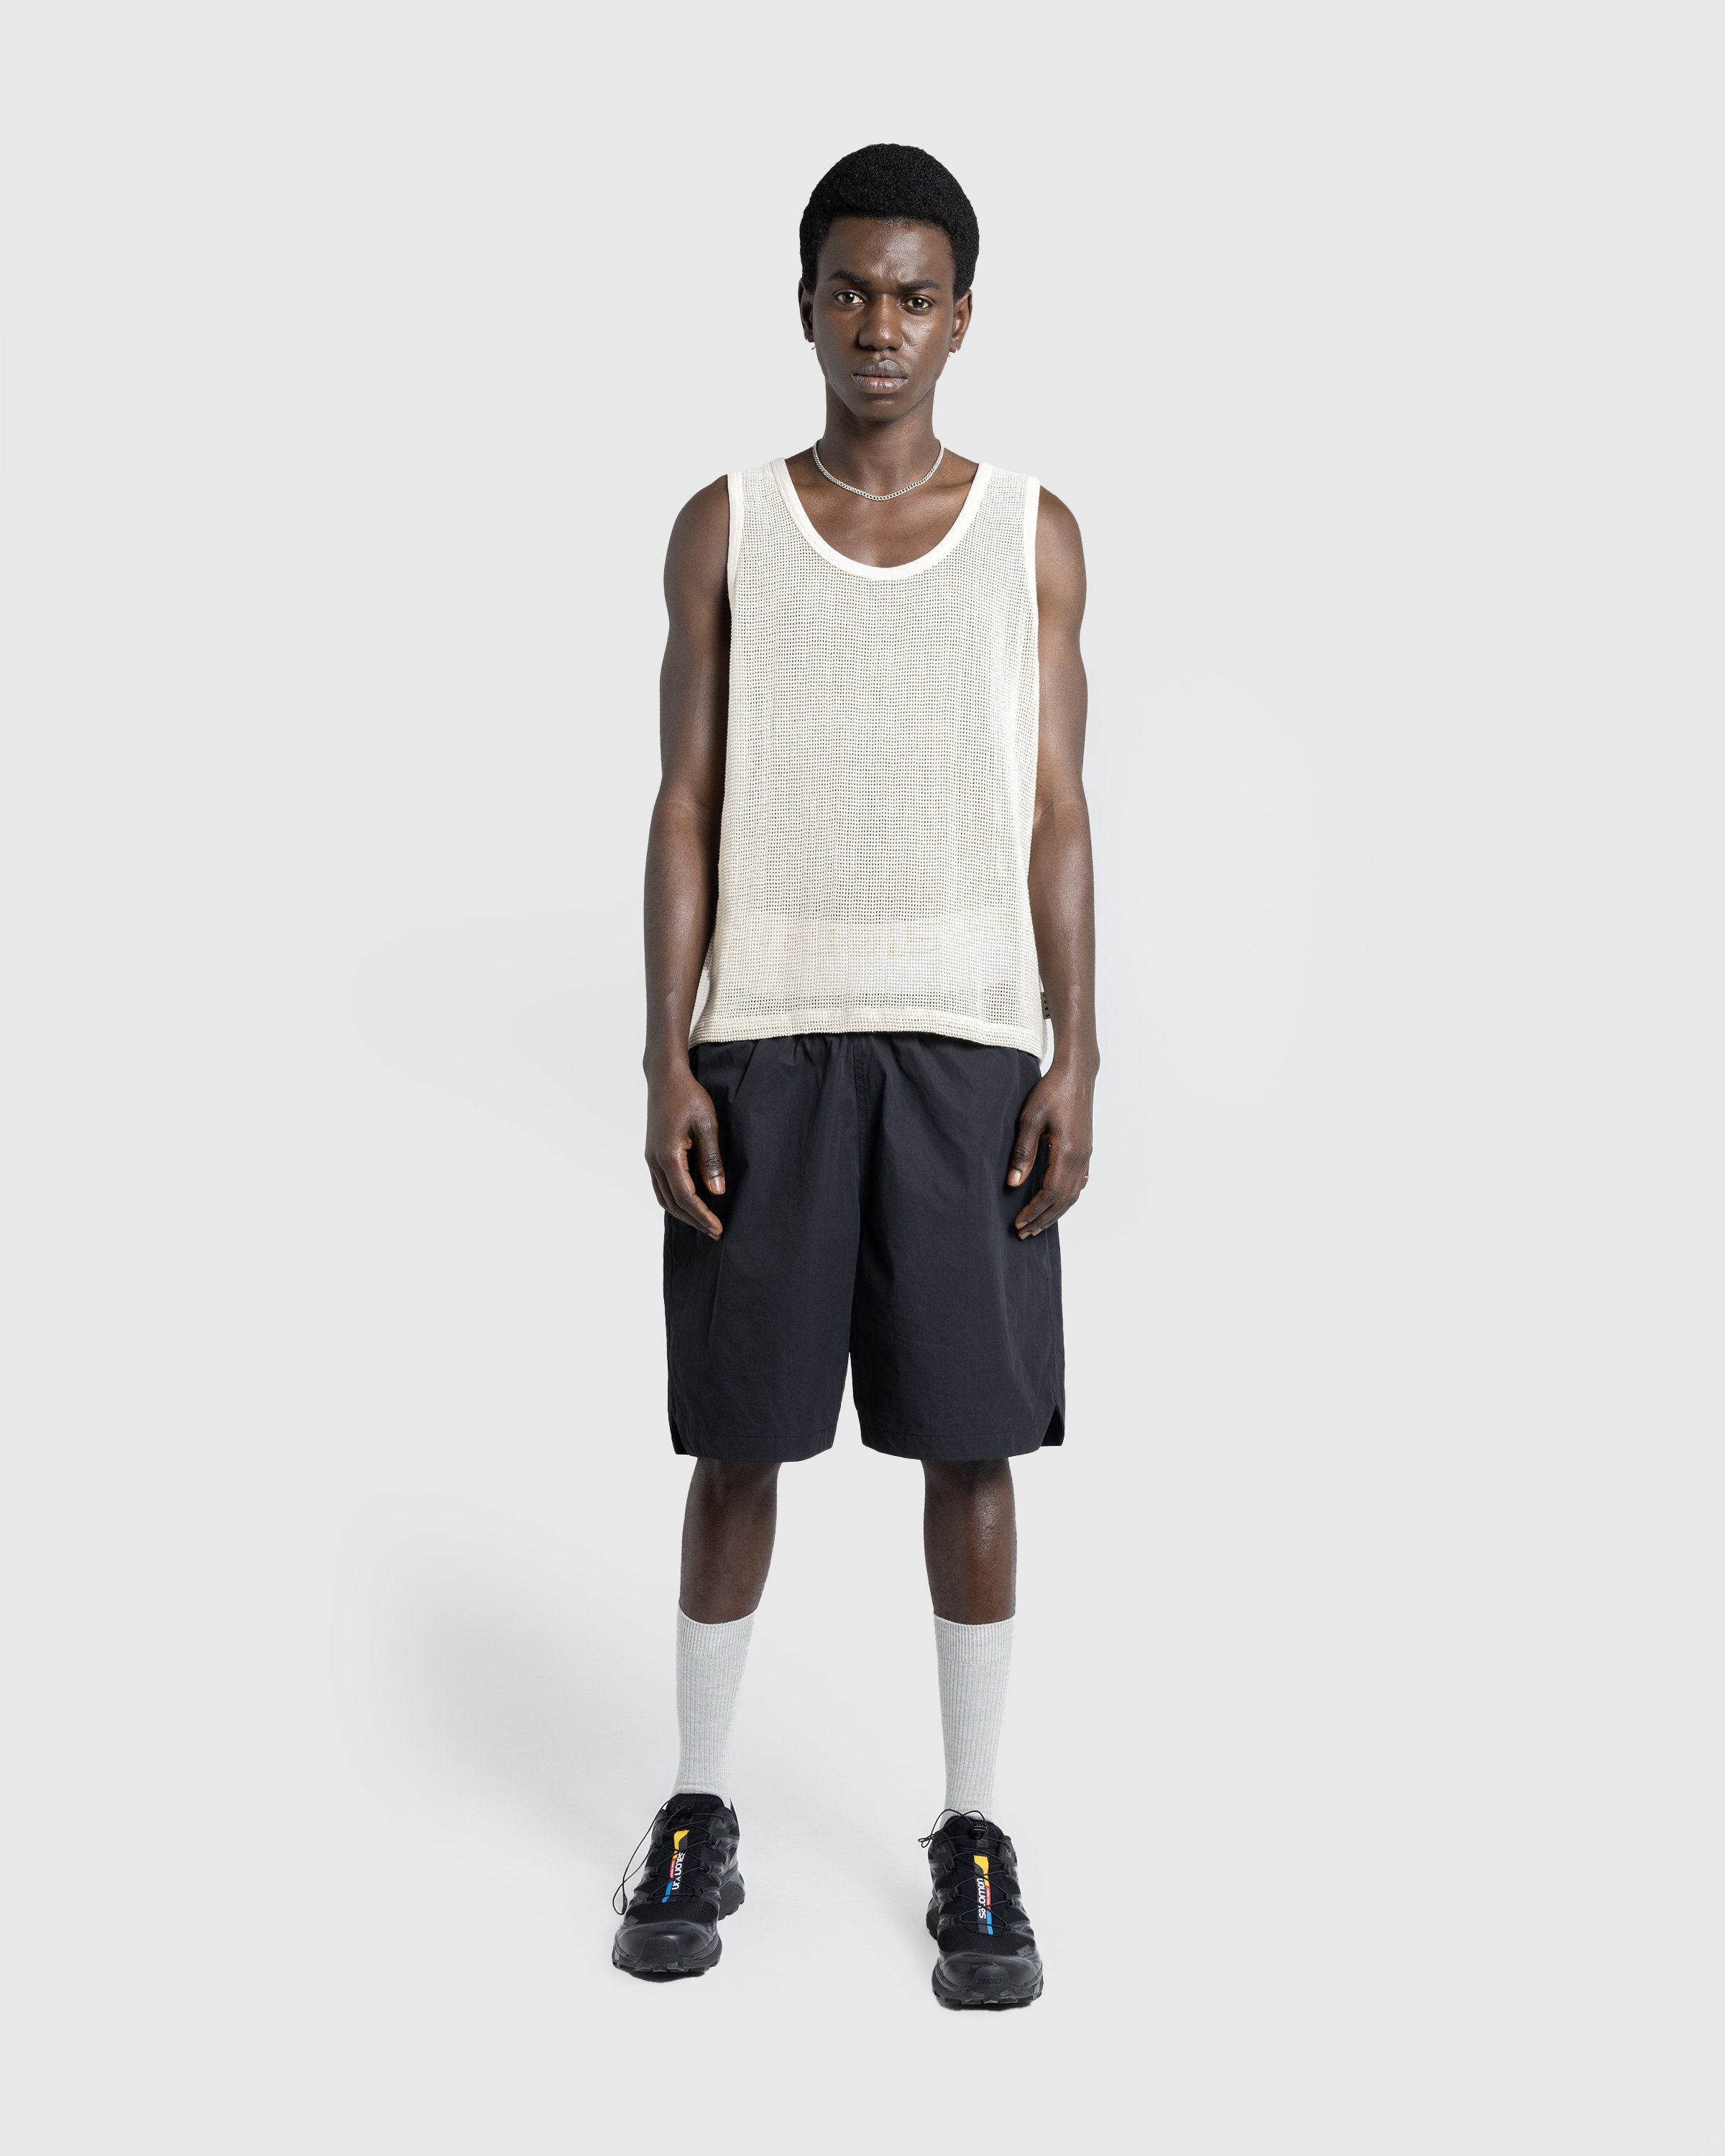 Highsnobiety HS05 - Pigment Dyed Cotton Mesh Tank Top - Clothing -  - Image 4